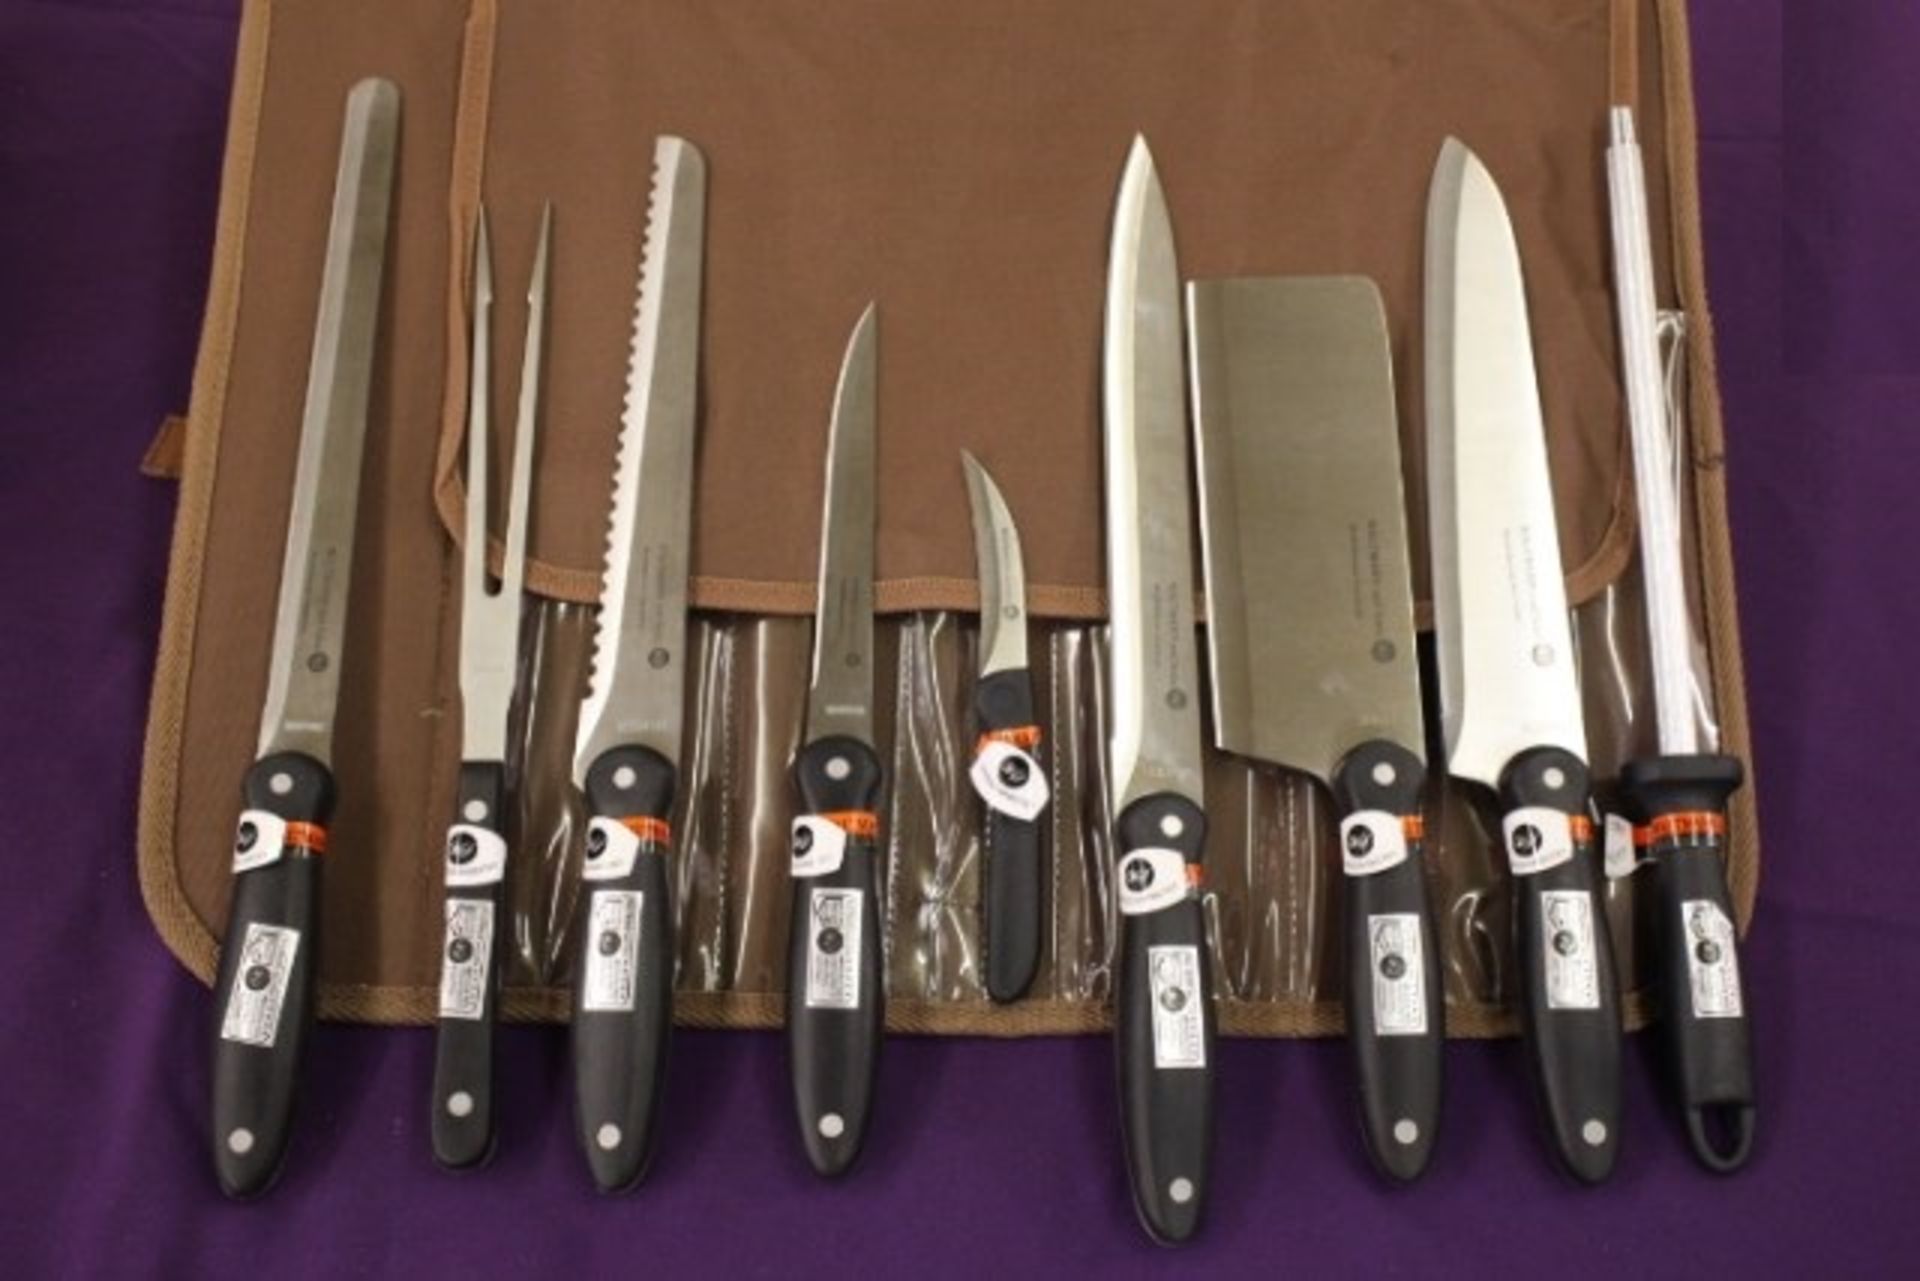 V *TRADE QTY* Brand New 9 Piece Chef's Knife Set with Sharpening steel in Cary Case RRP £199/$275